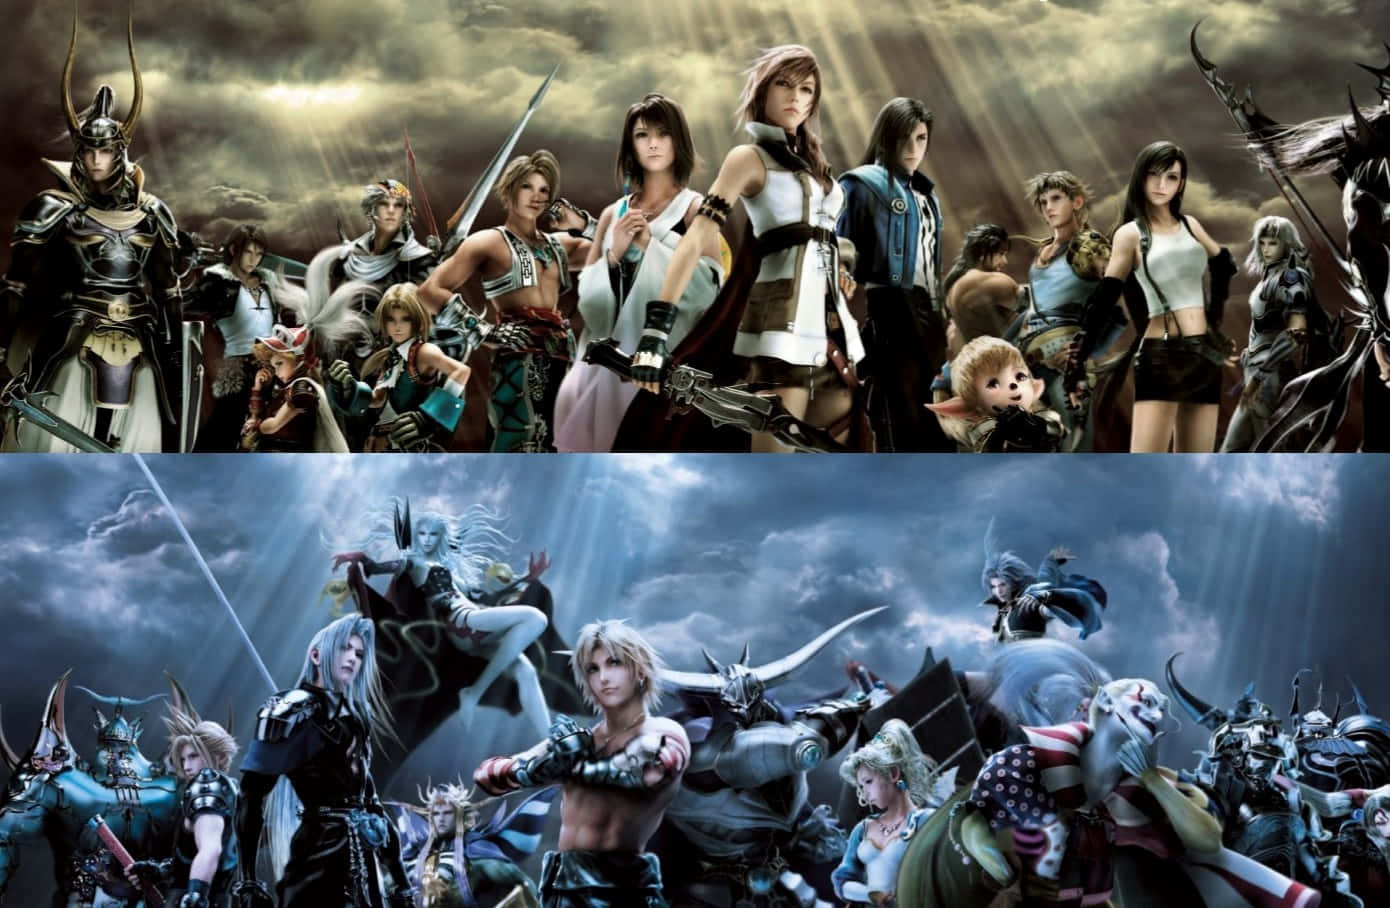 Group of Final Fantasy Characters Ready for Adventure Wallpaper